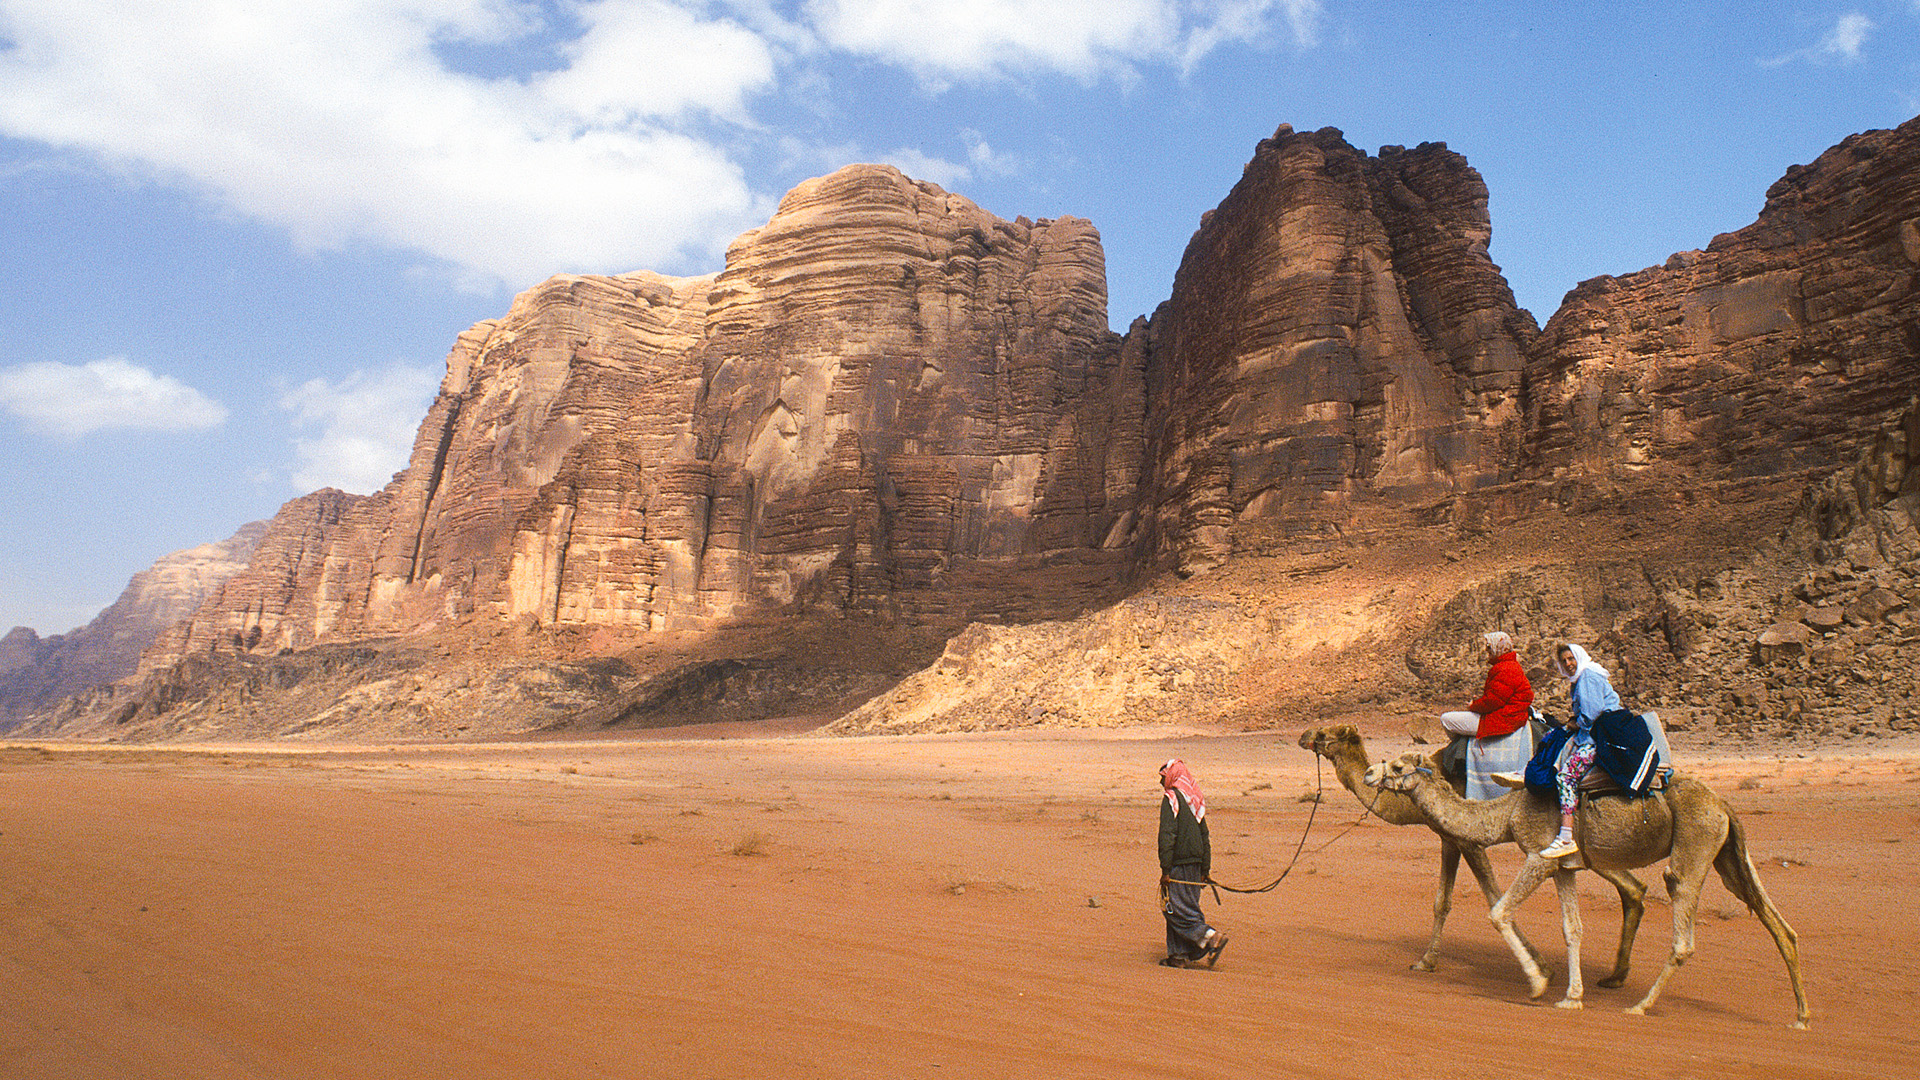 Travel to Jordan: In this panoramic photograph, Wadi Rum is captured, showcasing tourists on camelback against the backdrop of majestic mountains.